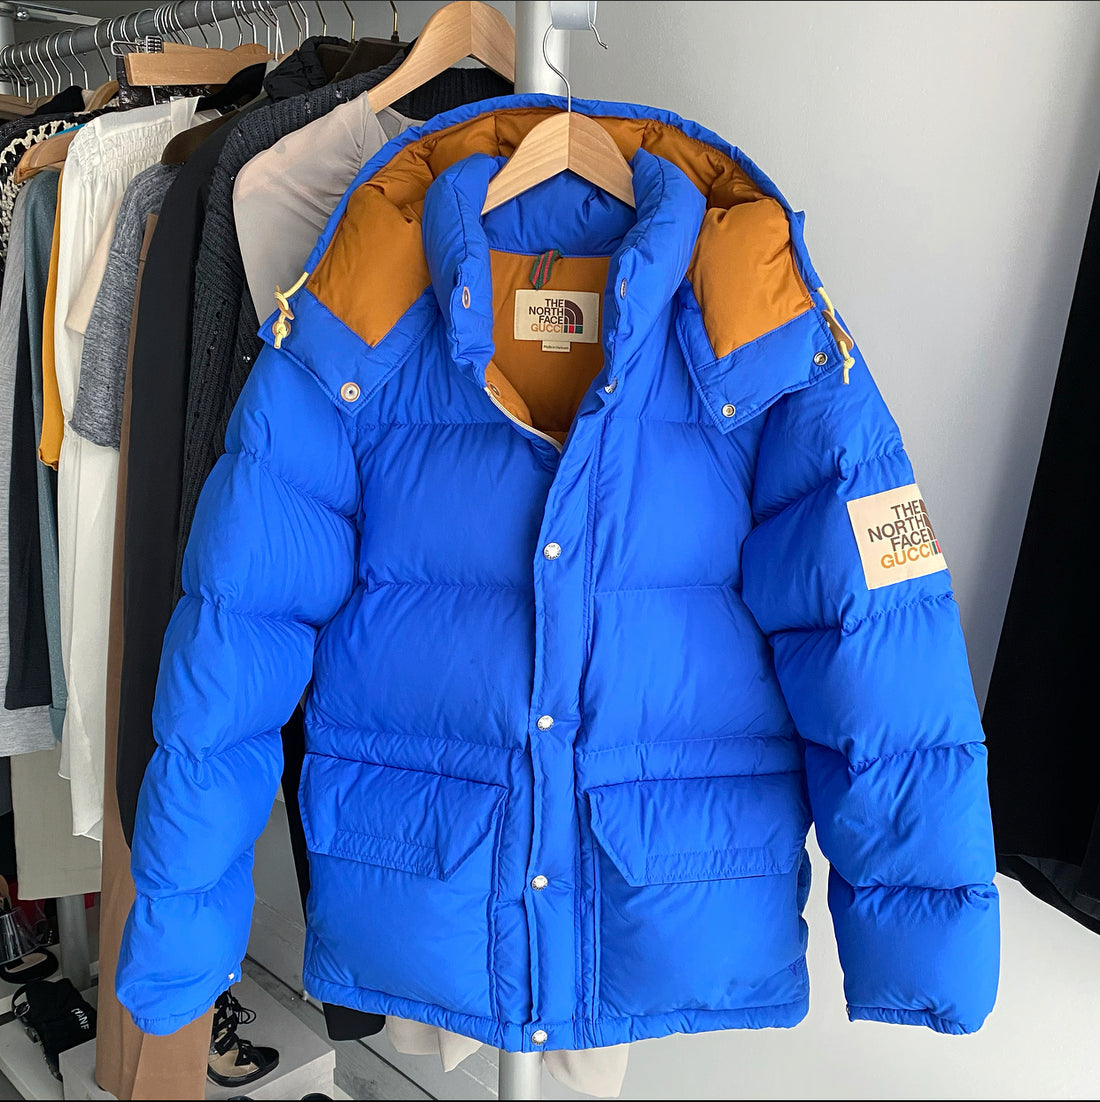 Gucci x The North Face Blue and Ochre Down Puffer Coat - XS